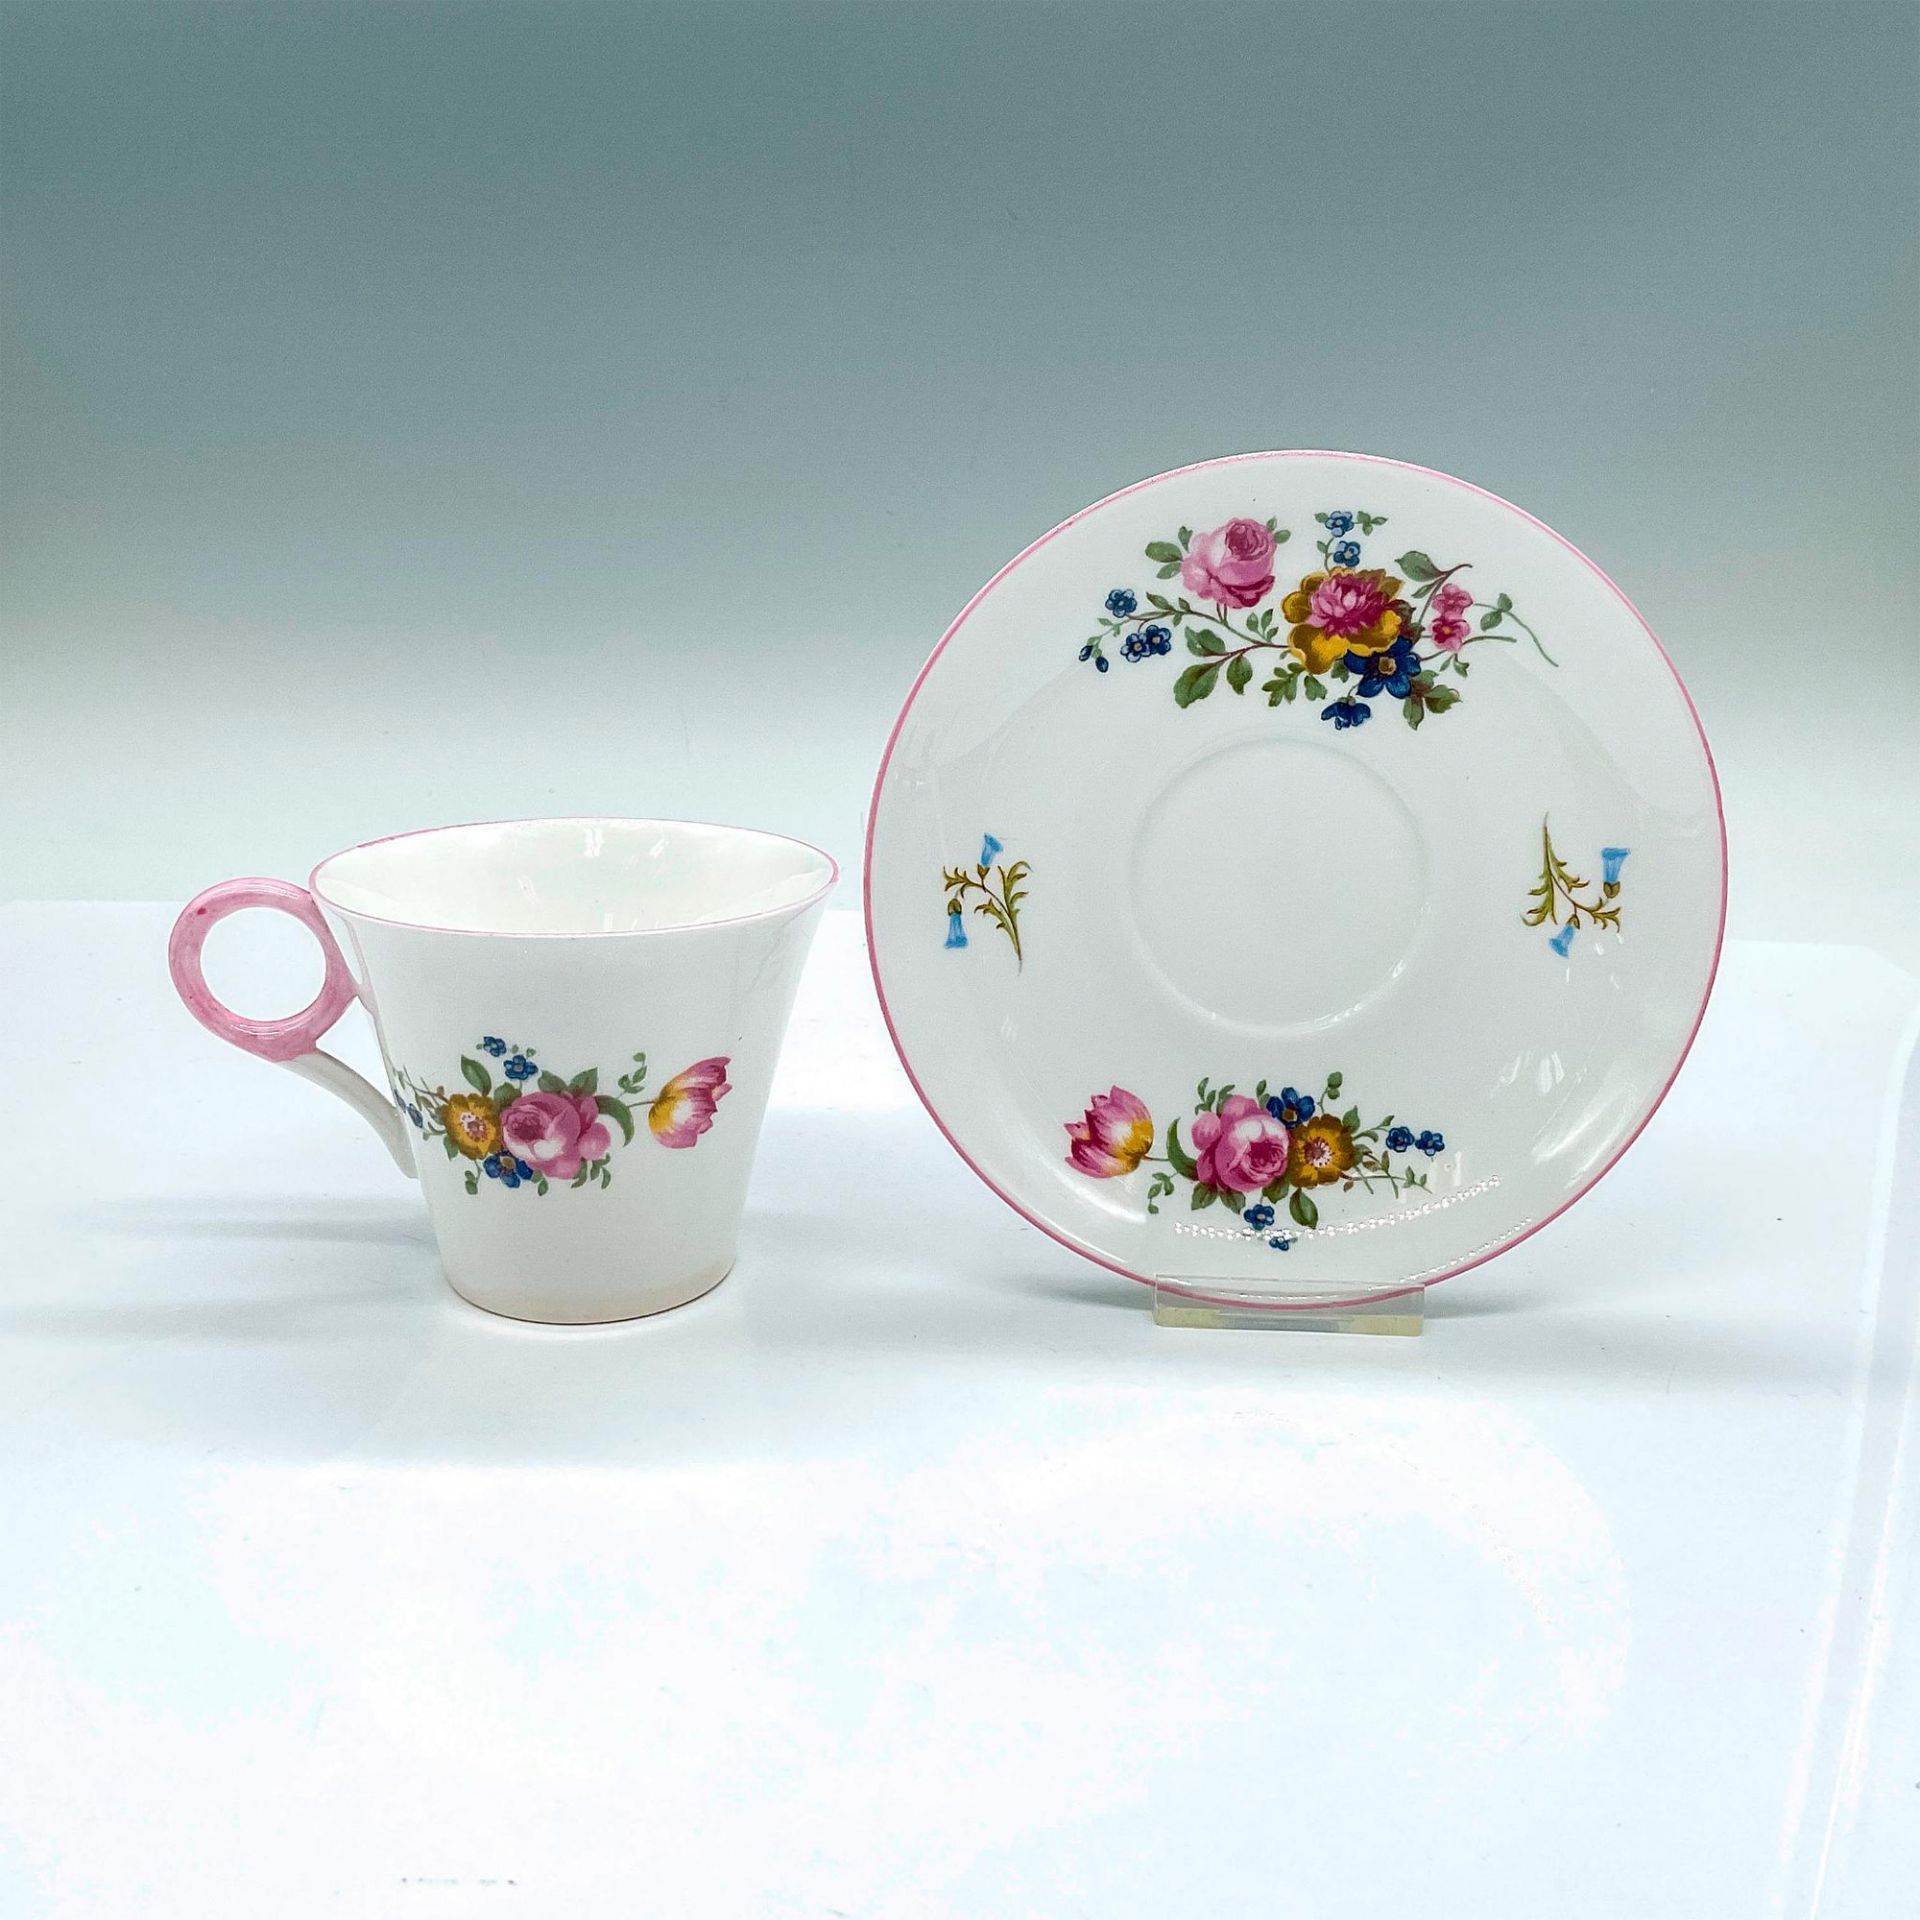 2pc Shelley China Floral Teacup and Saucer - Image 2 of 3